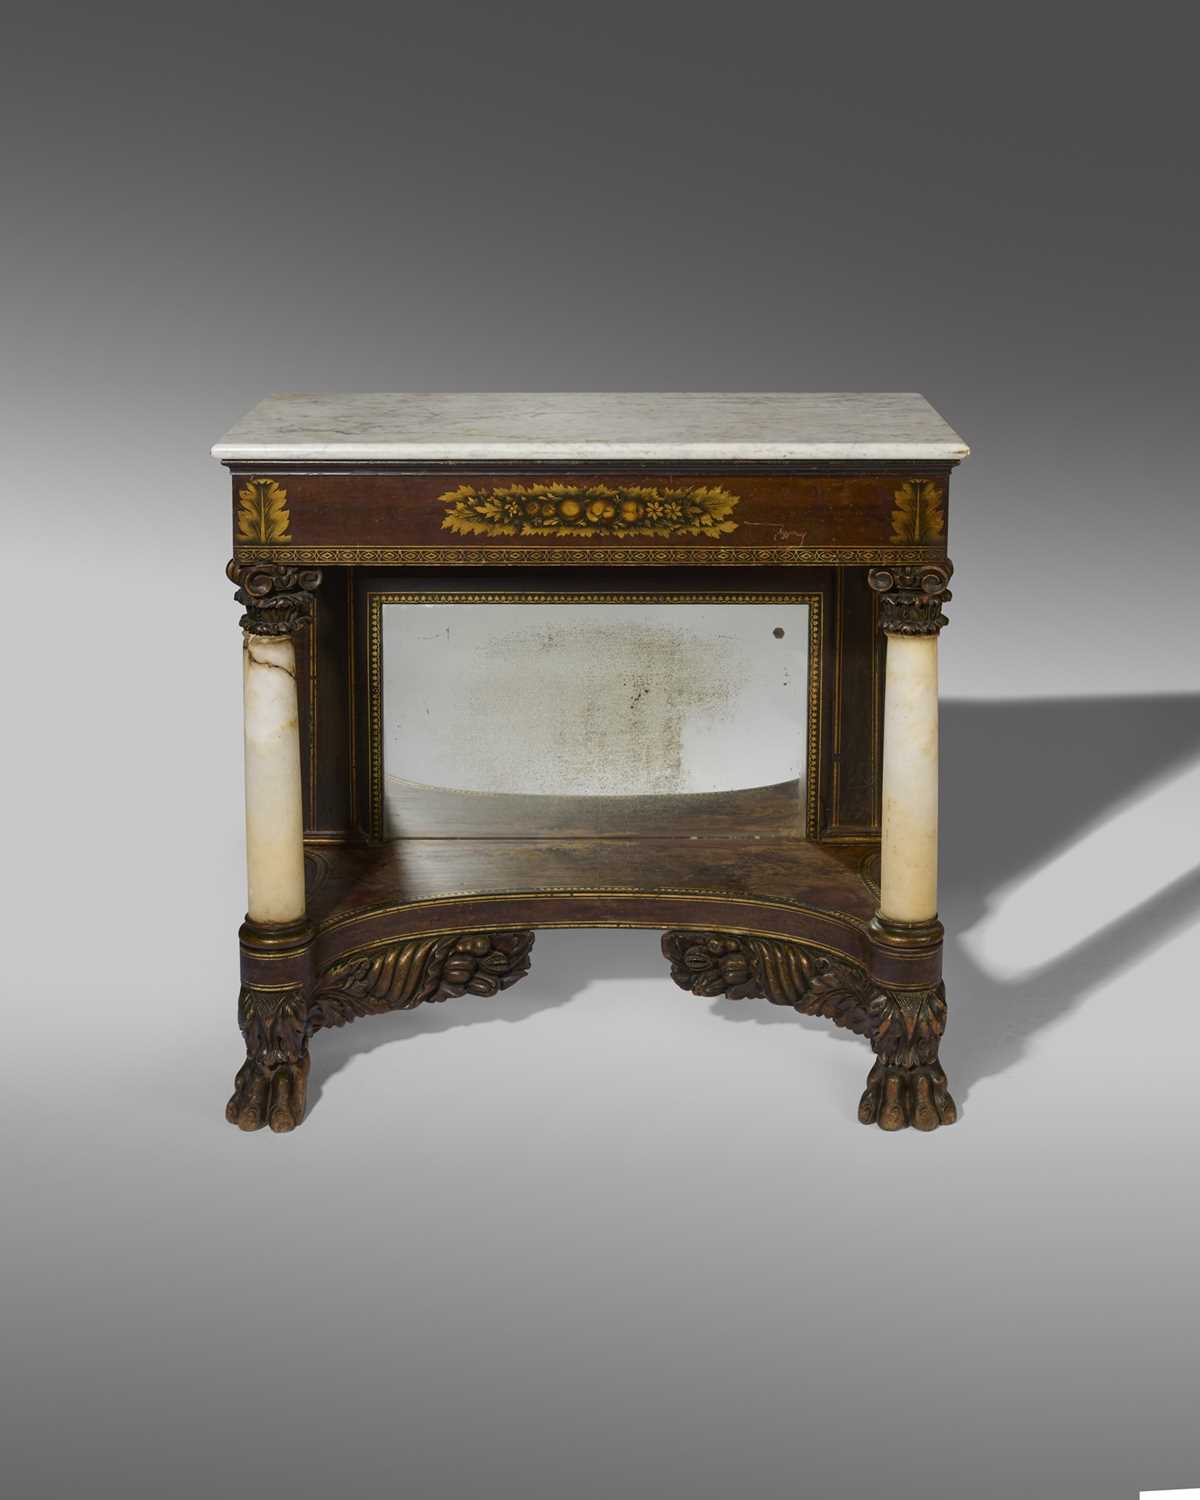 A RARE AMERICAN PAINTED WOOD AND ALABASTER CONSOLE TABLE ATTRIBUTED TO DUNCAN PHYFE (1770-1854),